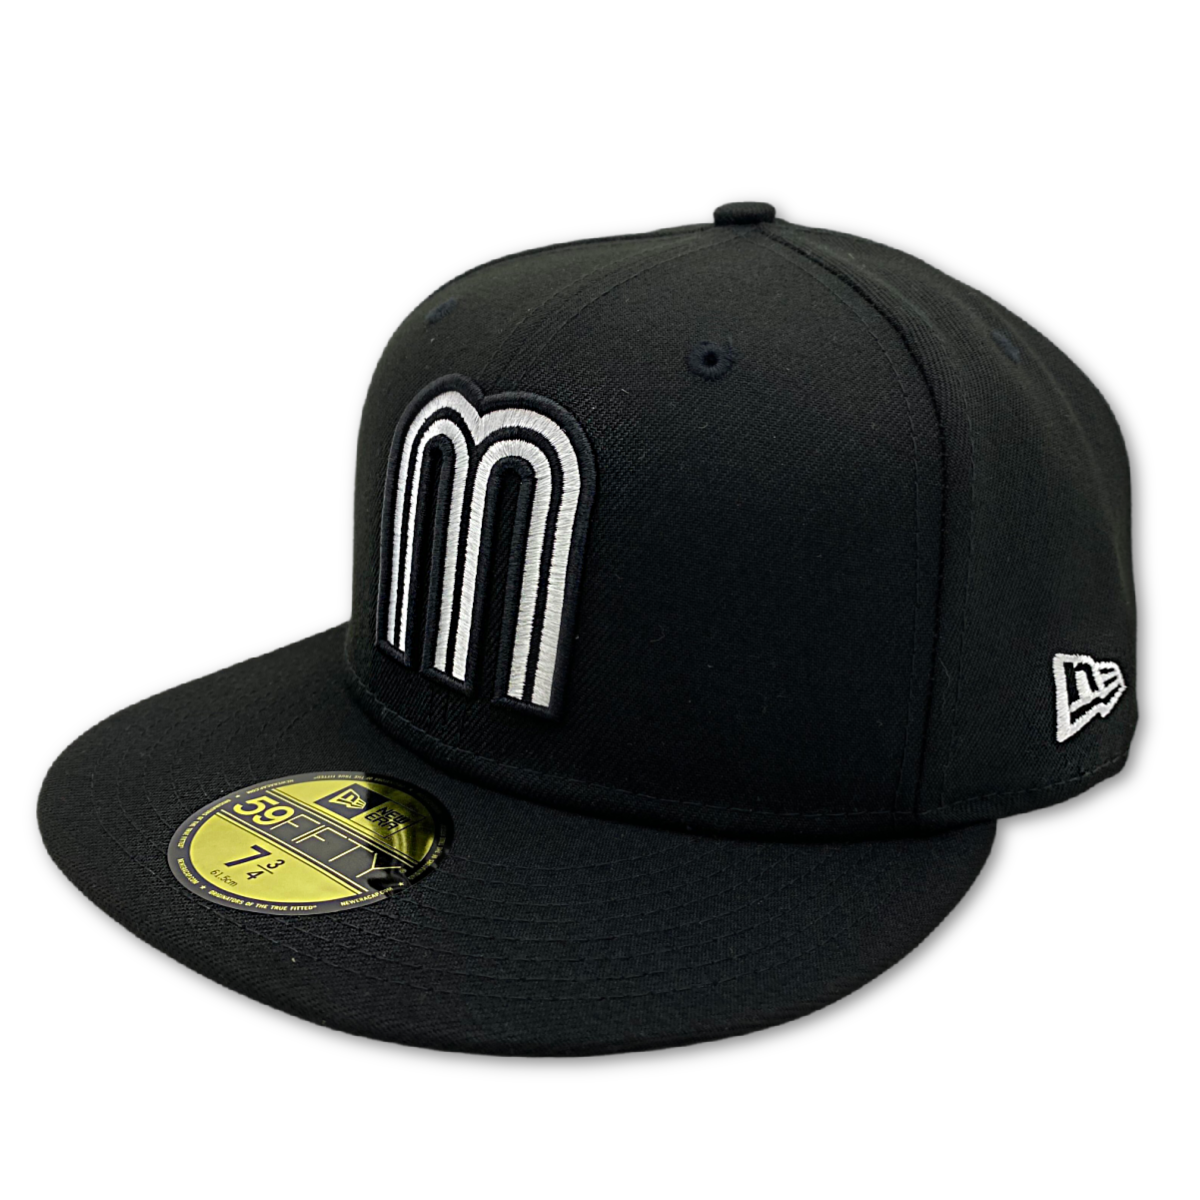 NEW ERA OFFICIAL MEXICO 59FIFTY FITTED HAT-BLACK nvsoccer.com The Coliseum